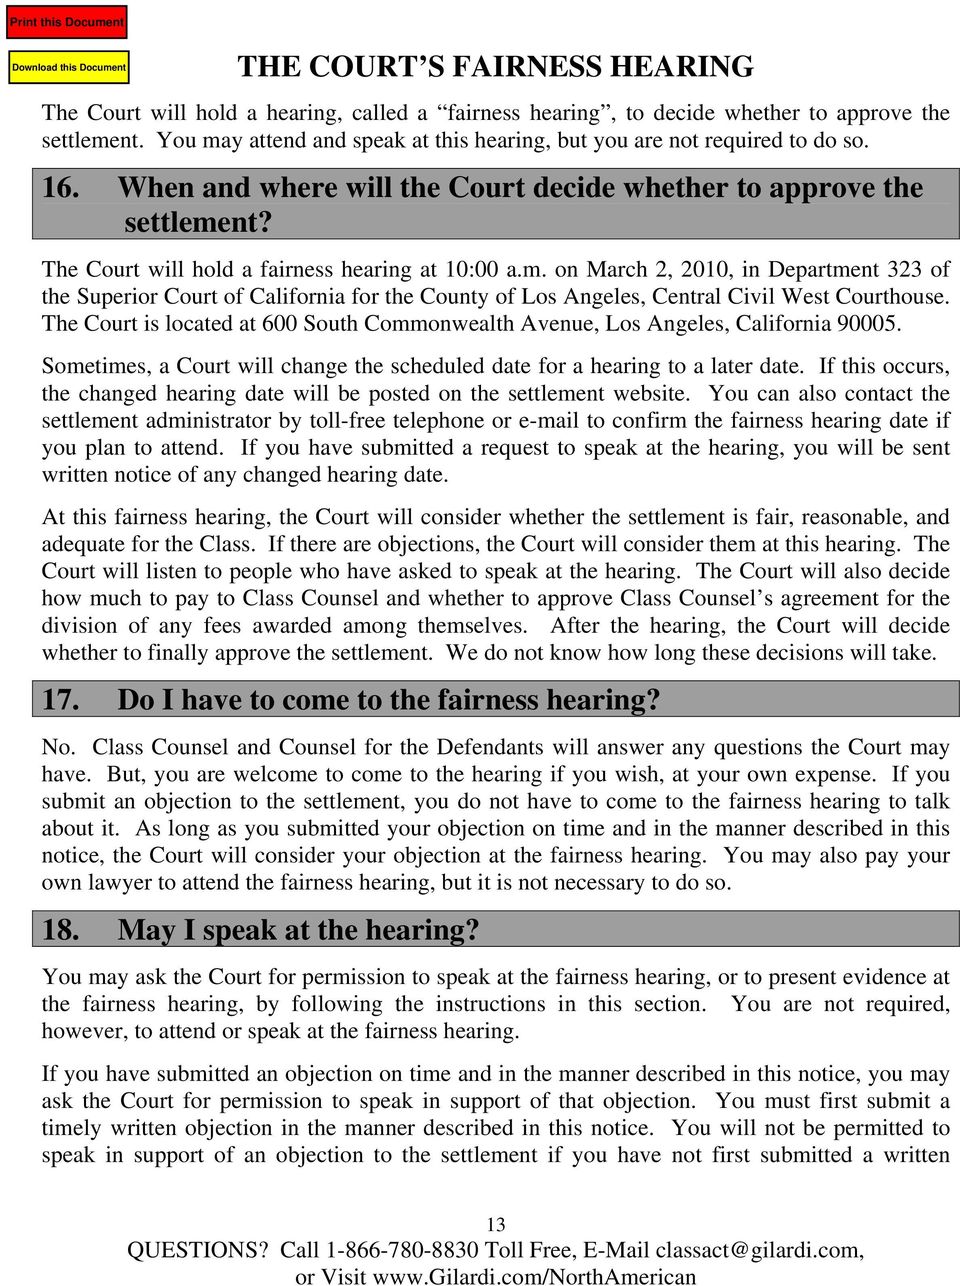 The Court will hold a fairness hearing at 10:00 a.m. on March 2, 2010, in Department 323 of the Superior Court of California for the County of Los Angeles, Central Civil West Courthouse.